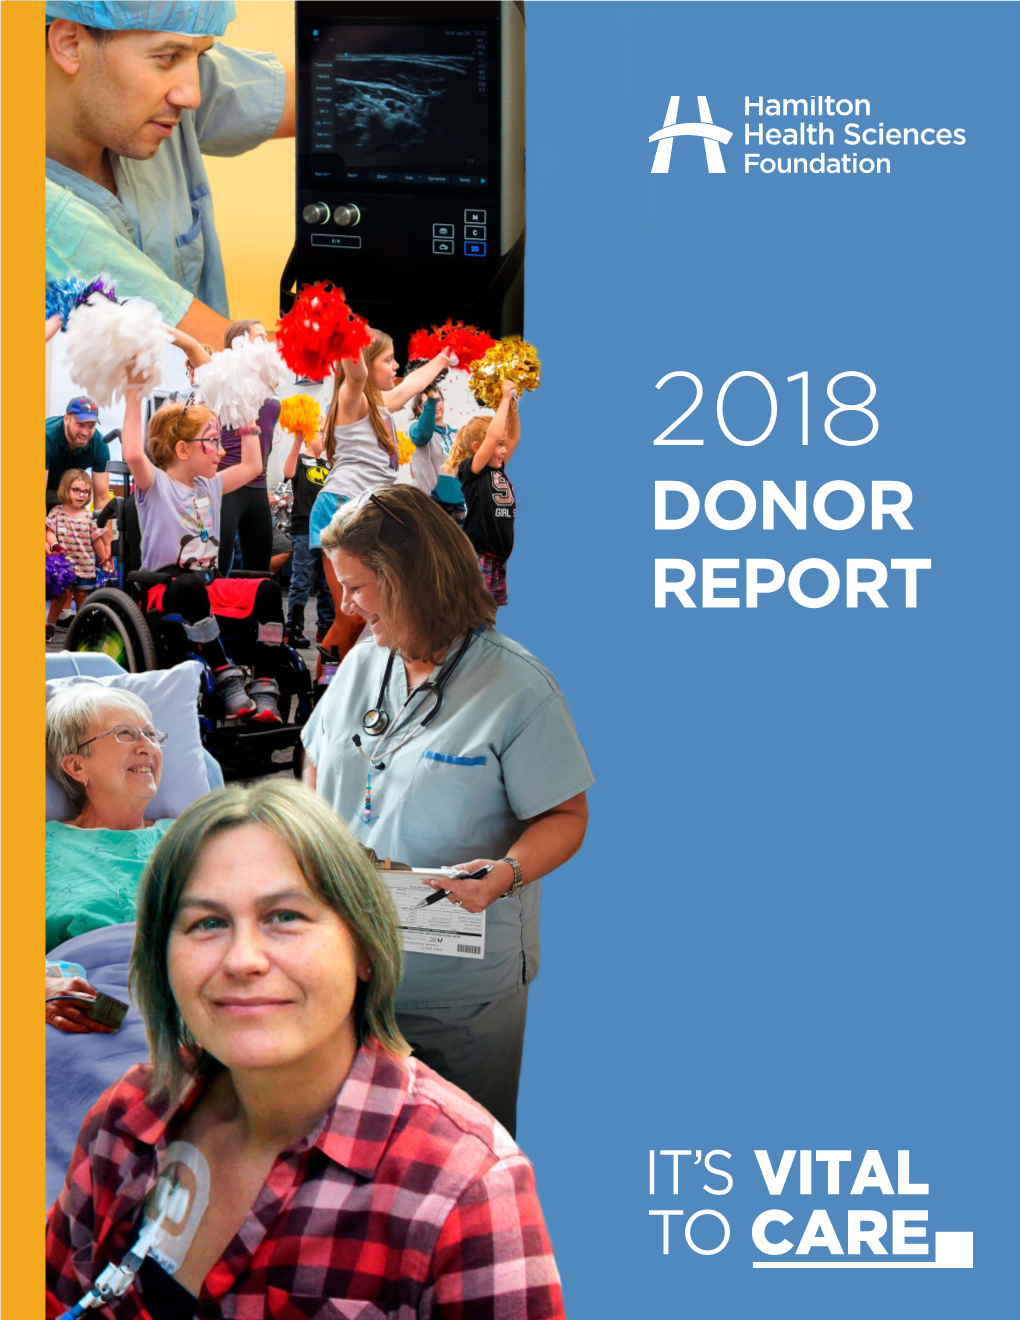 Donor Report a Message from Jon Jurus, Board Chair, and Pearl F